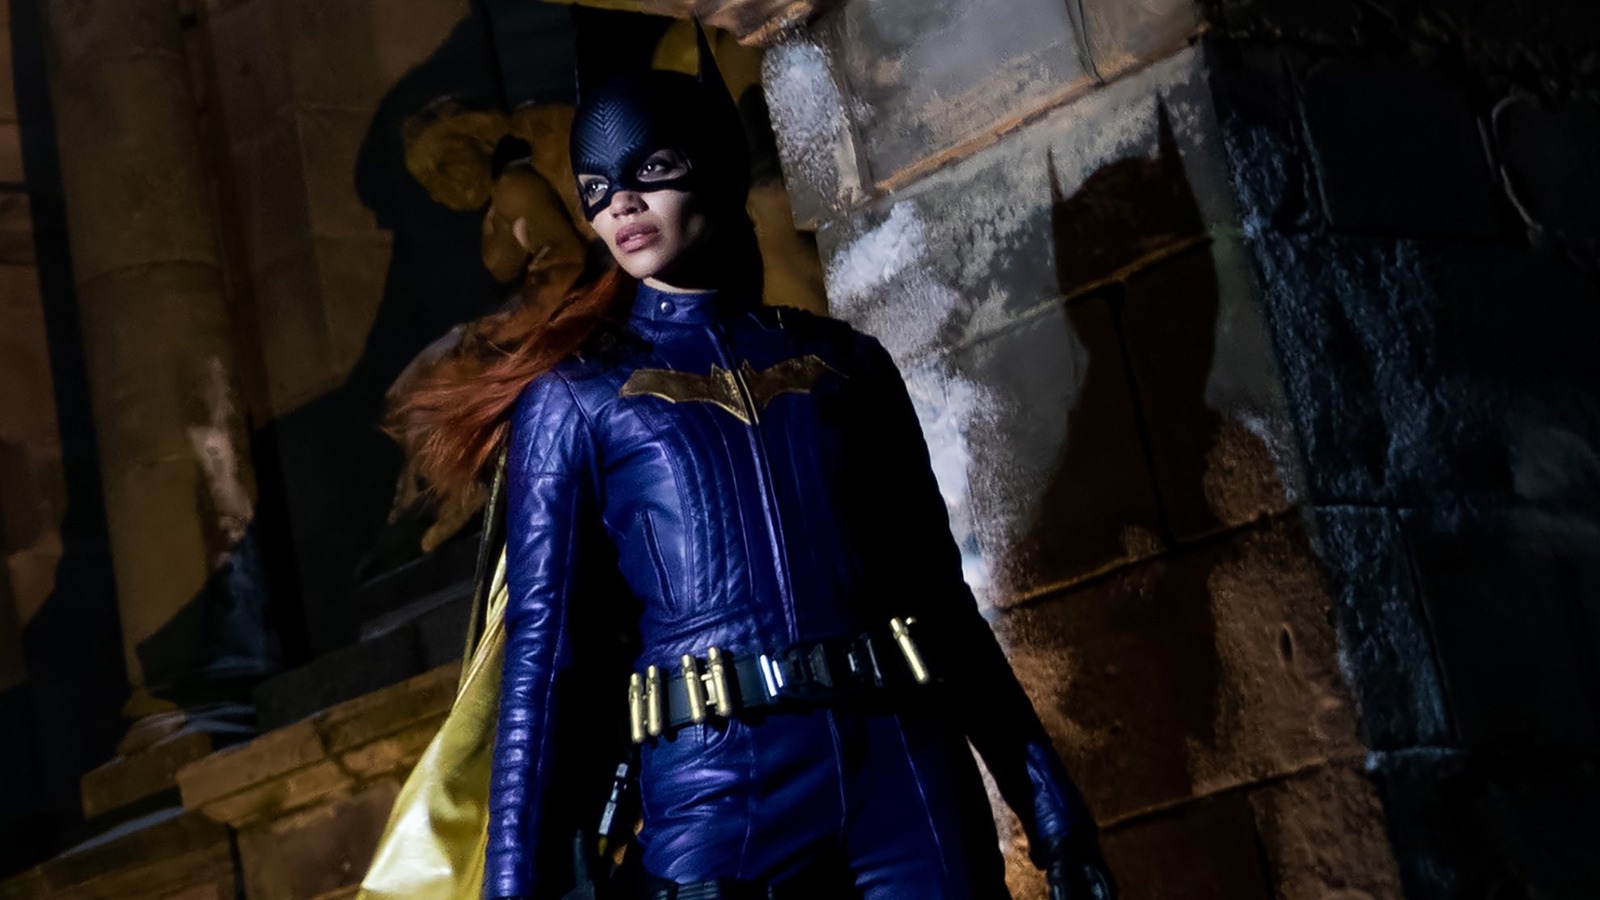 The Batgirl movie was shelved and Warner Bros. don't plan to release it